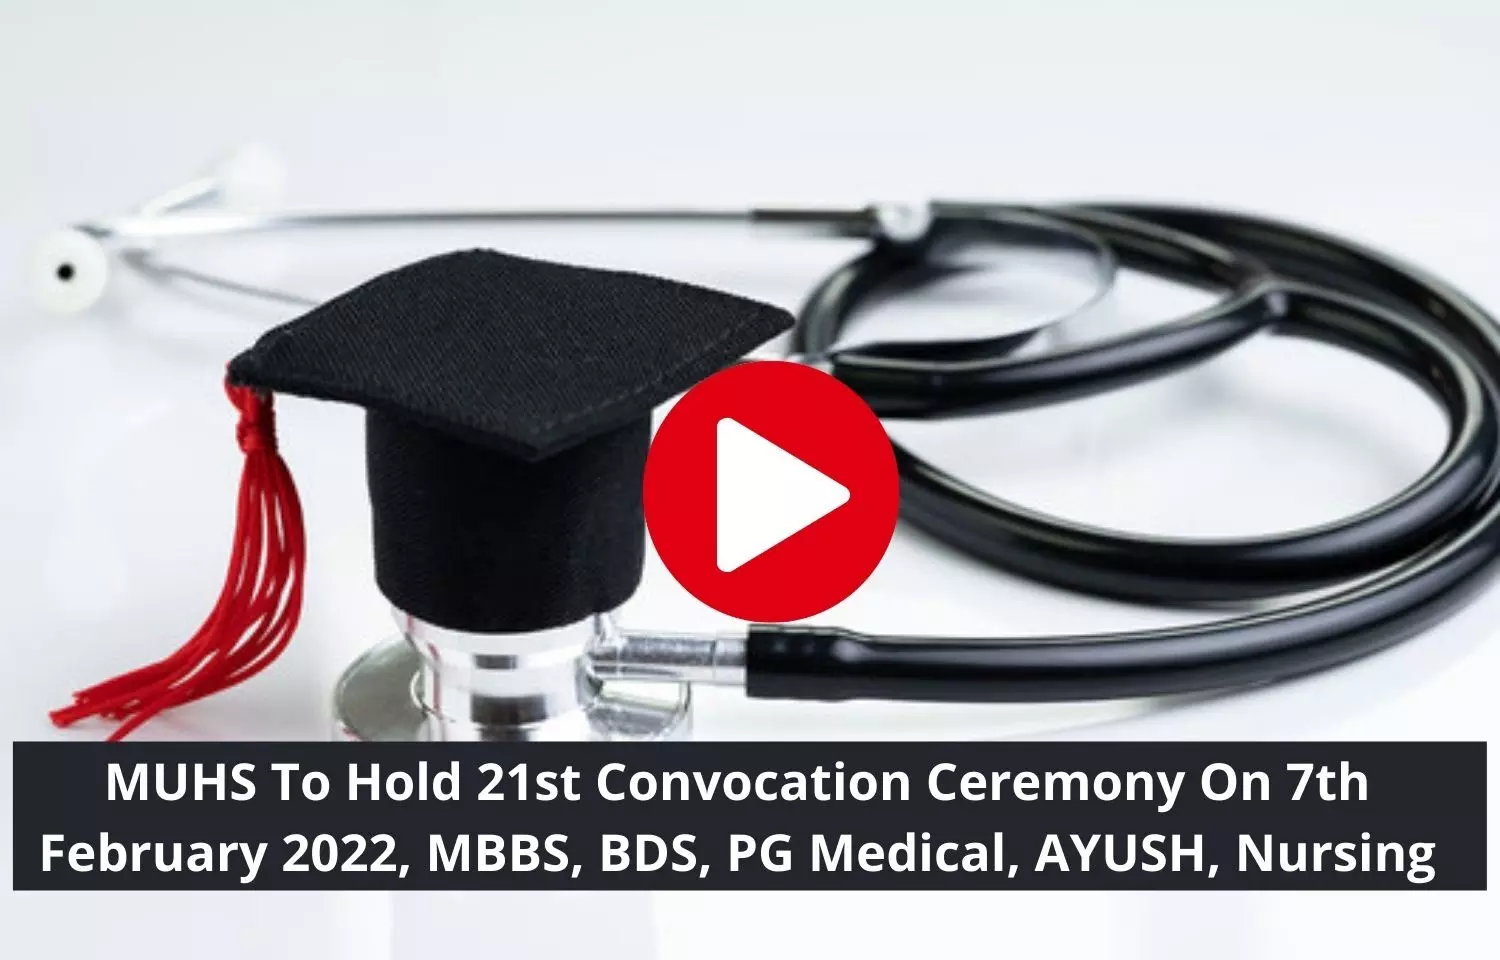 MUHS to hold 21st Convocation Ceremony on 7th February 2022